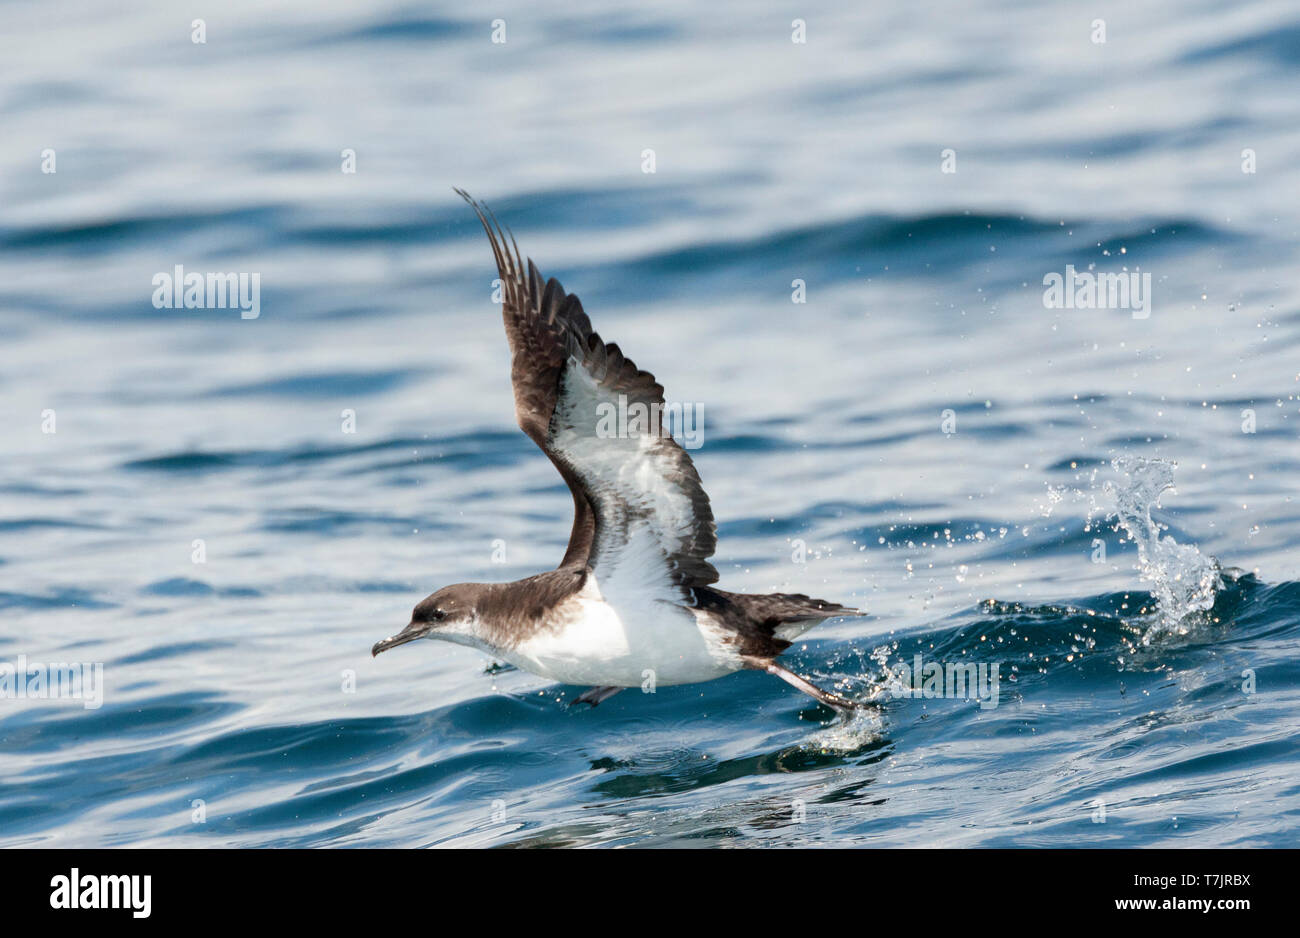 Manx Shearwater (Puffinus puffinus) taking off from the surface of the Atlantic ocean off Cornwall in England during late summer. Running over the wat Stock Photo